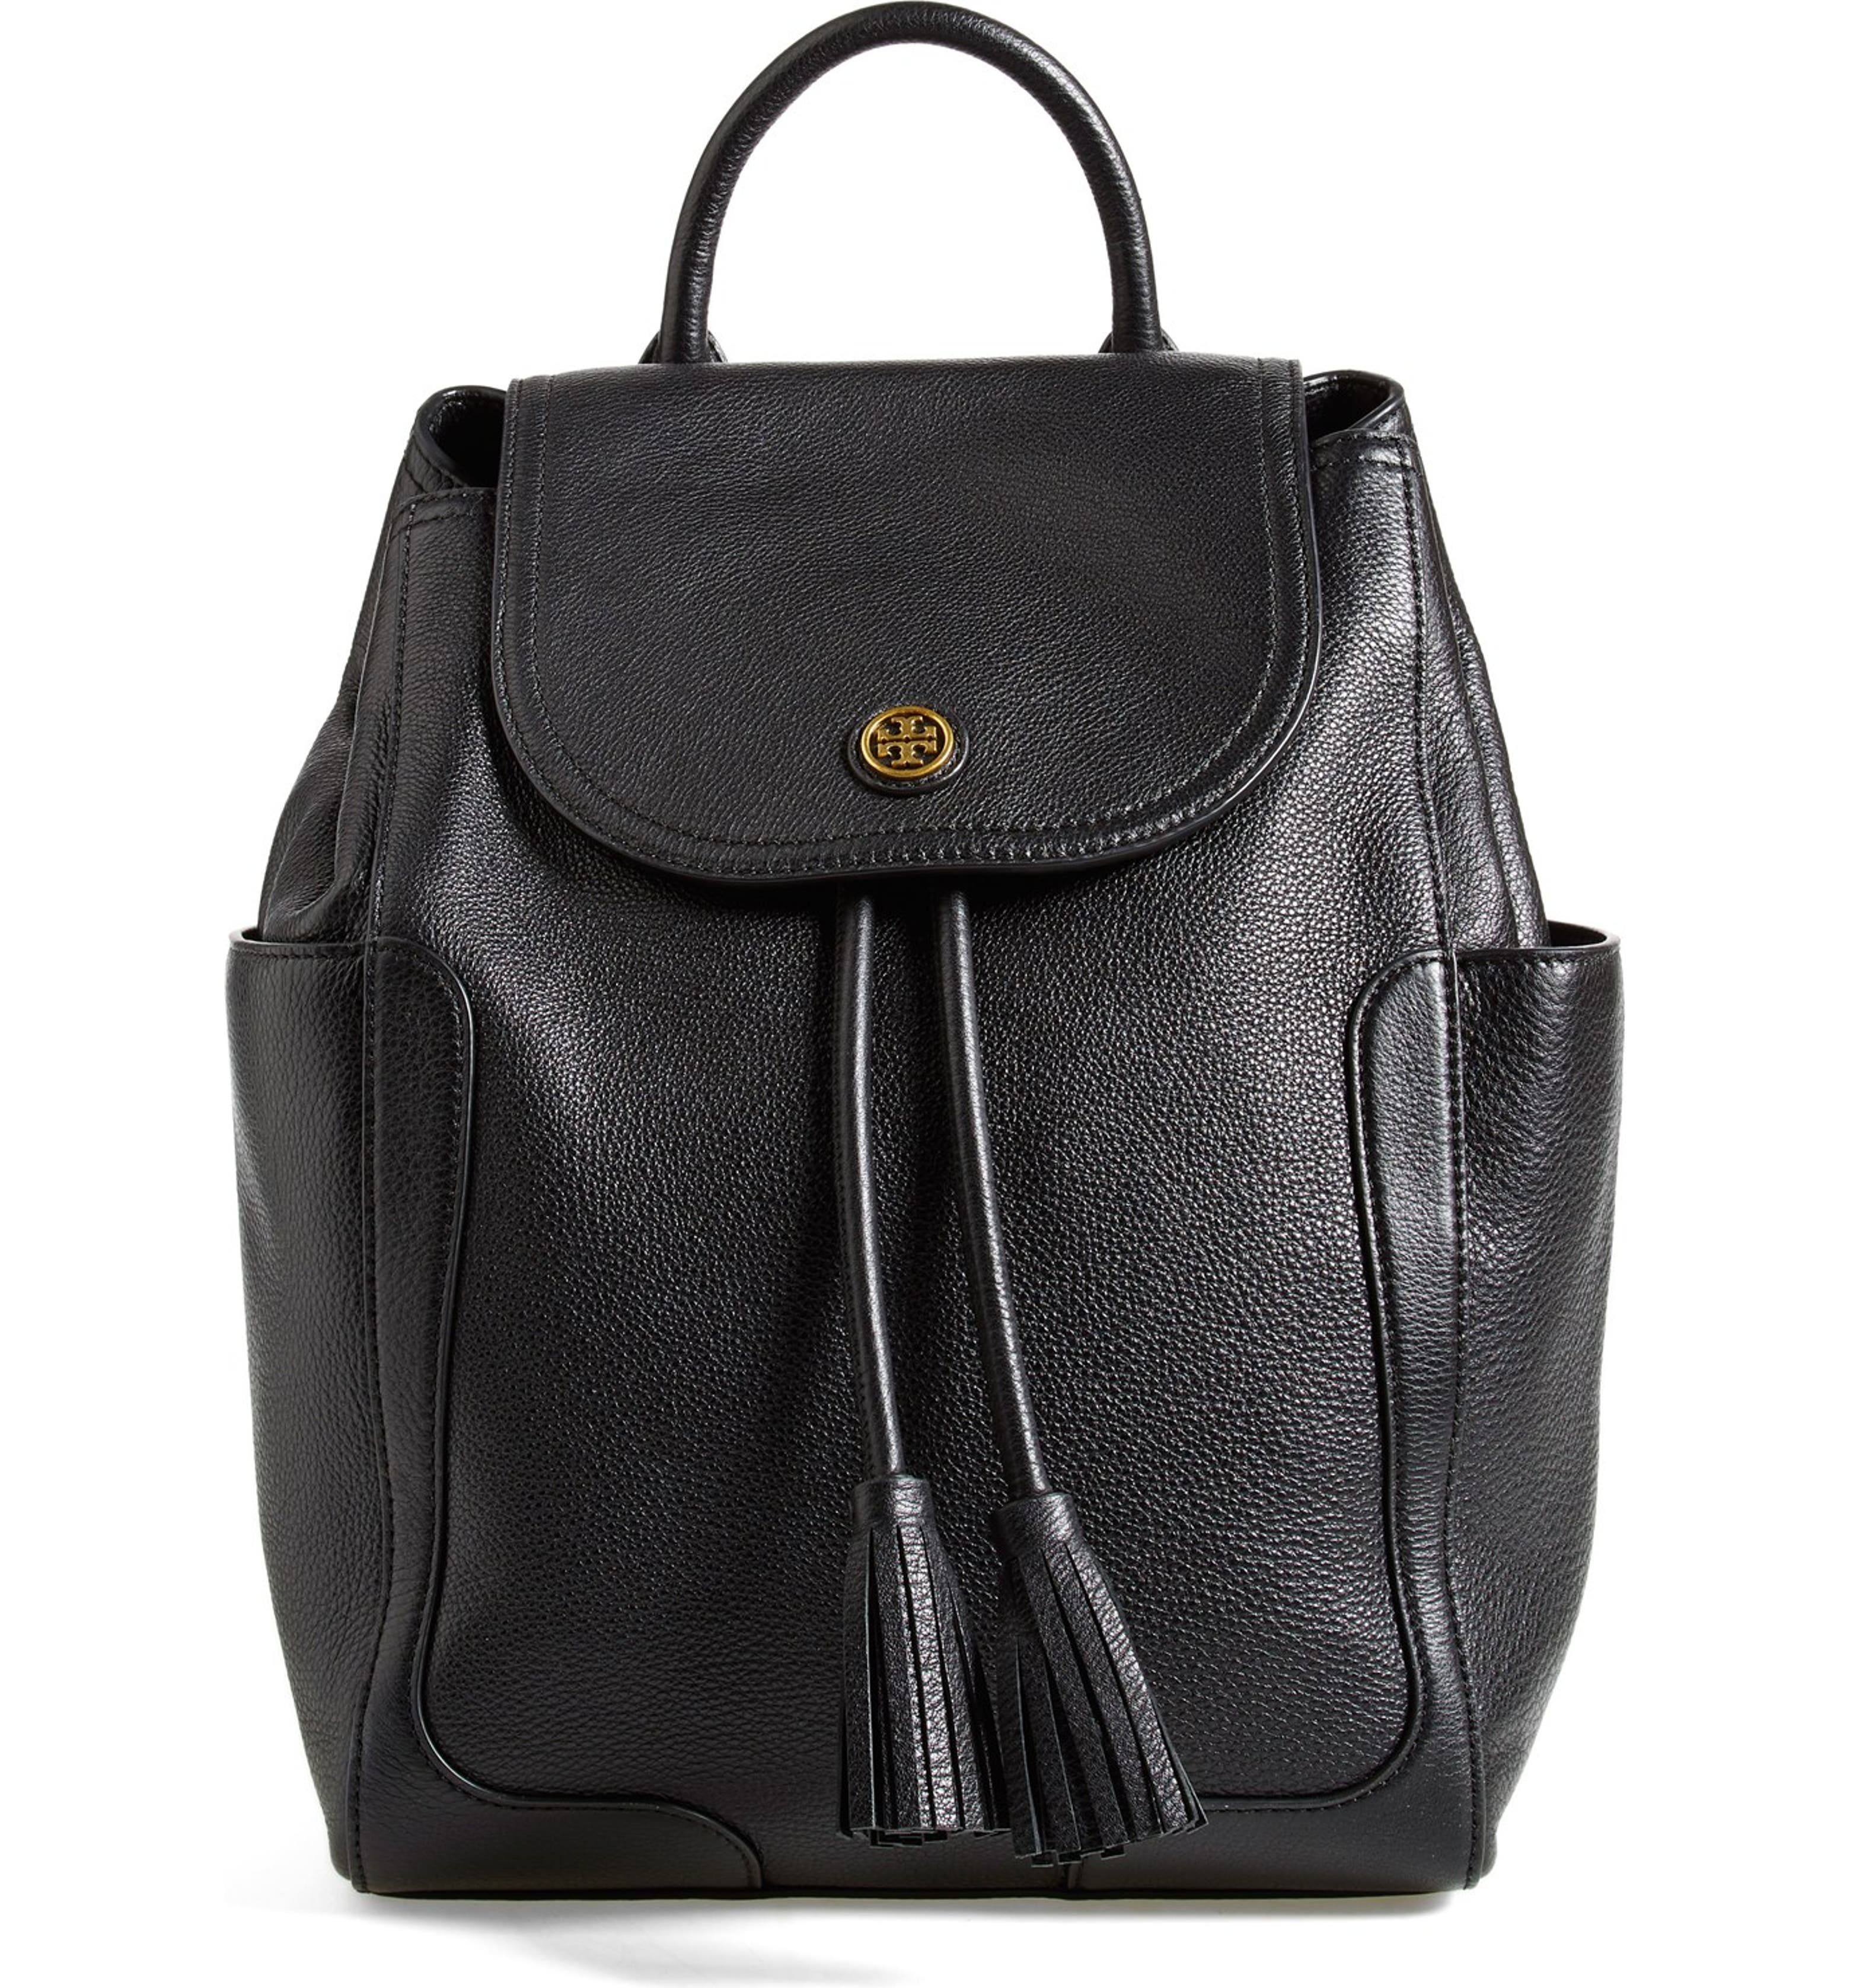 Tory Burch 'Frances' Leather Flap Backpack | Nordstrom